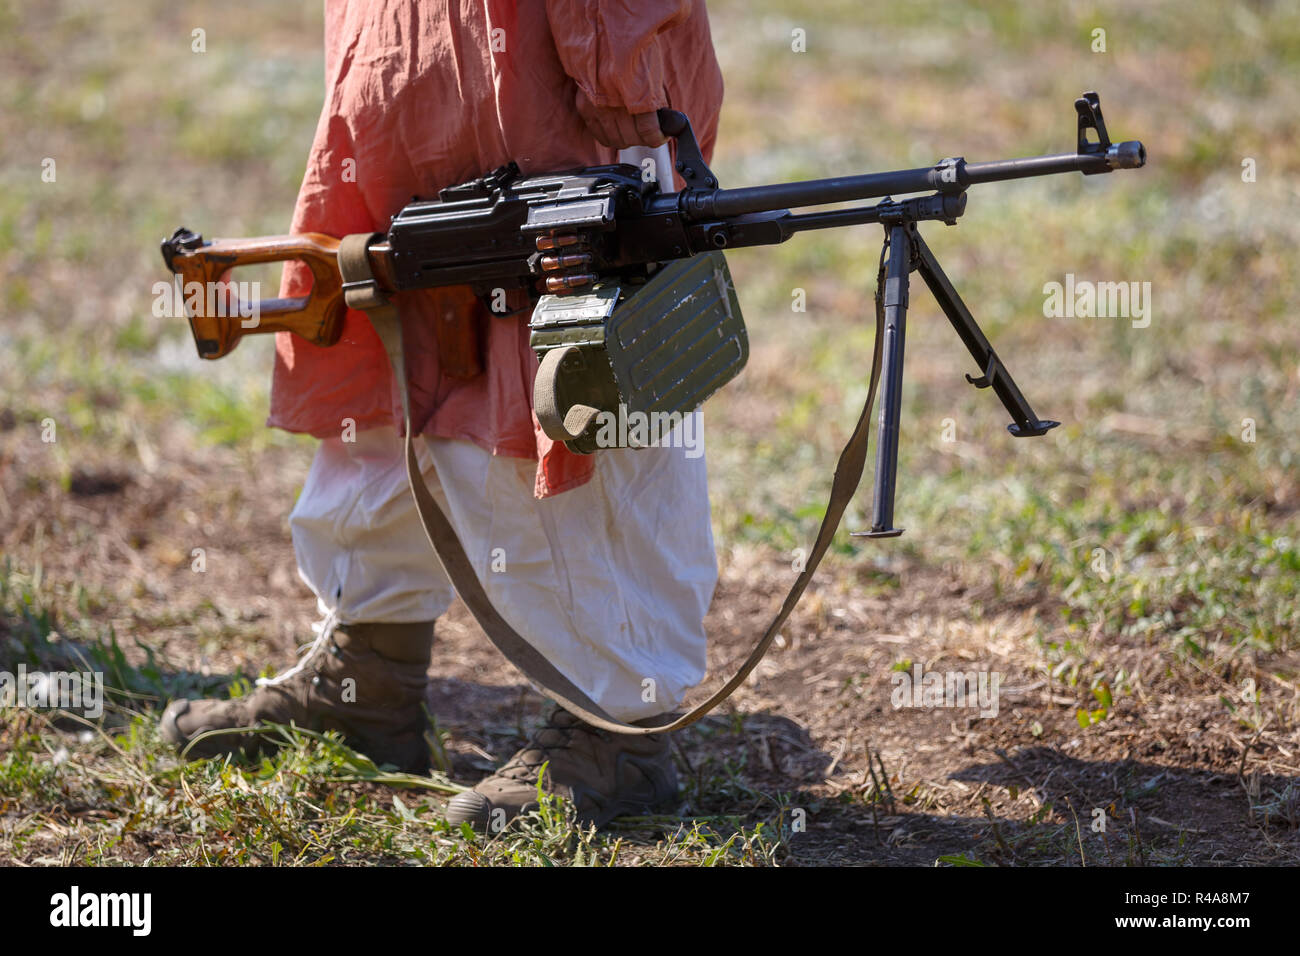 SAMBEK, ROSTOV REGION, RUSSIA, AUGUST 19, 2018: A man in traditional dress is carrying the russian machine gun Stock Photo